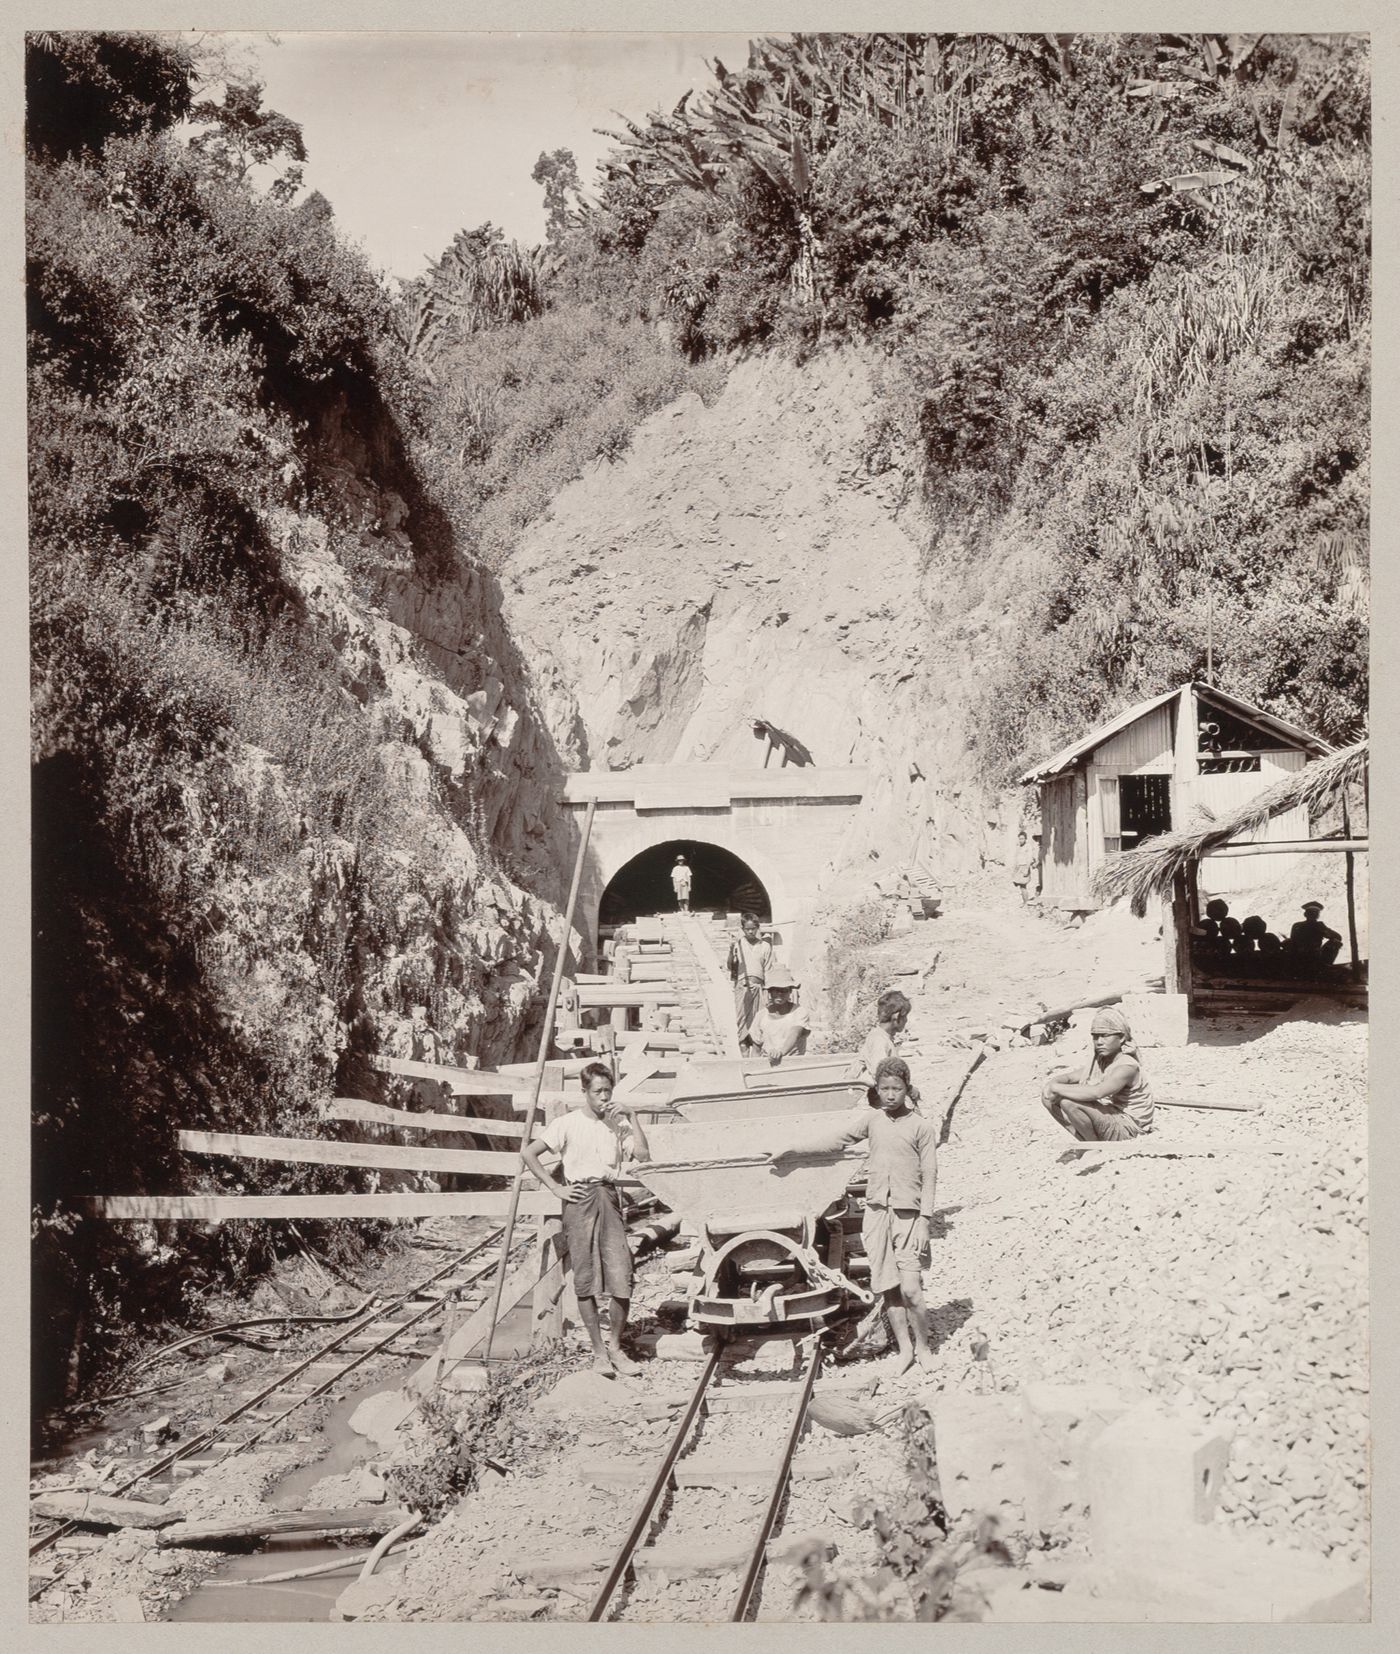 View of two smoking workers and other workers, hopper cars, tracks and the entrance to a railroad tunnel under construction, probably Khao Phlung hill, Phrae Province, Siam (now Thailand)